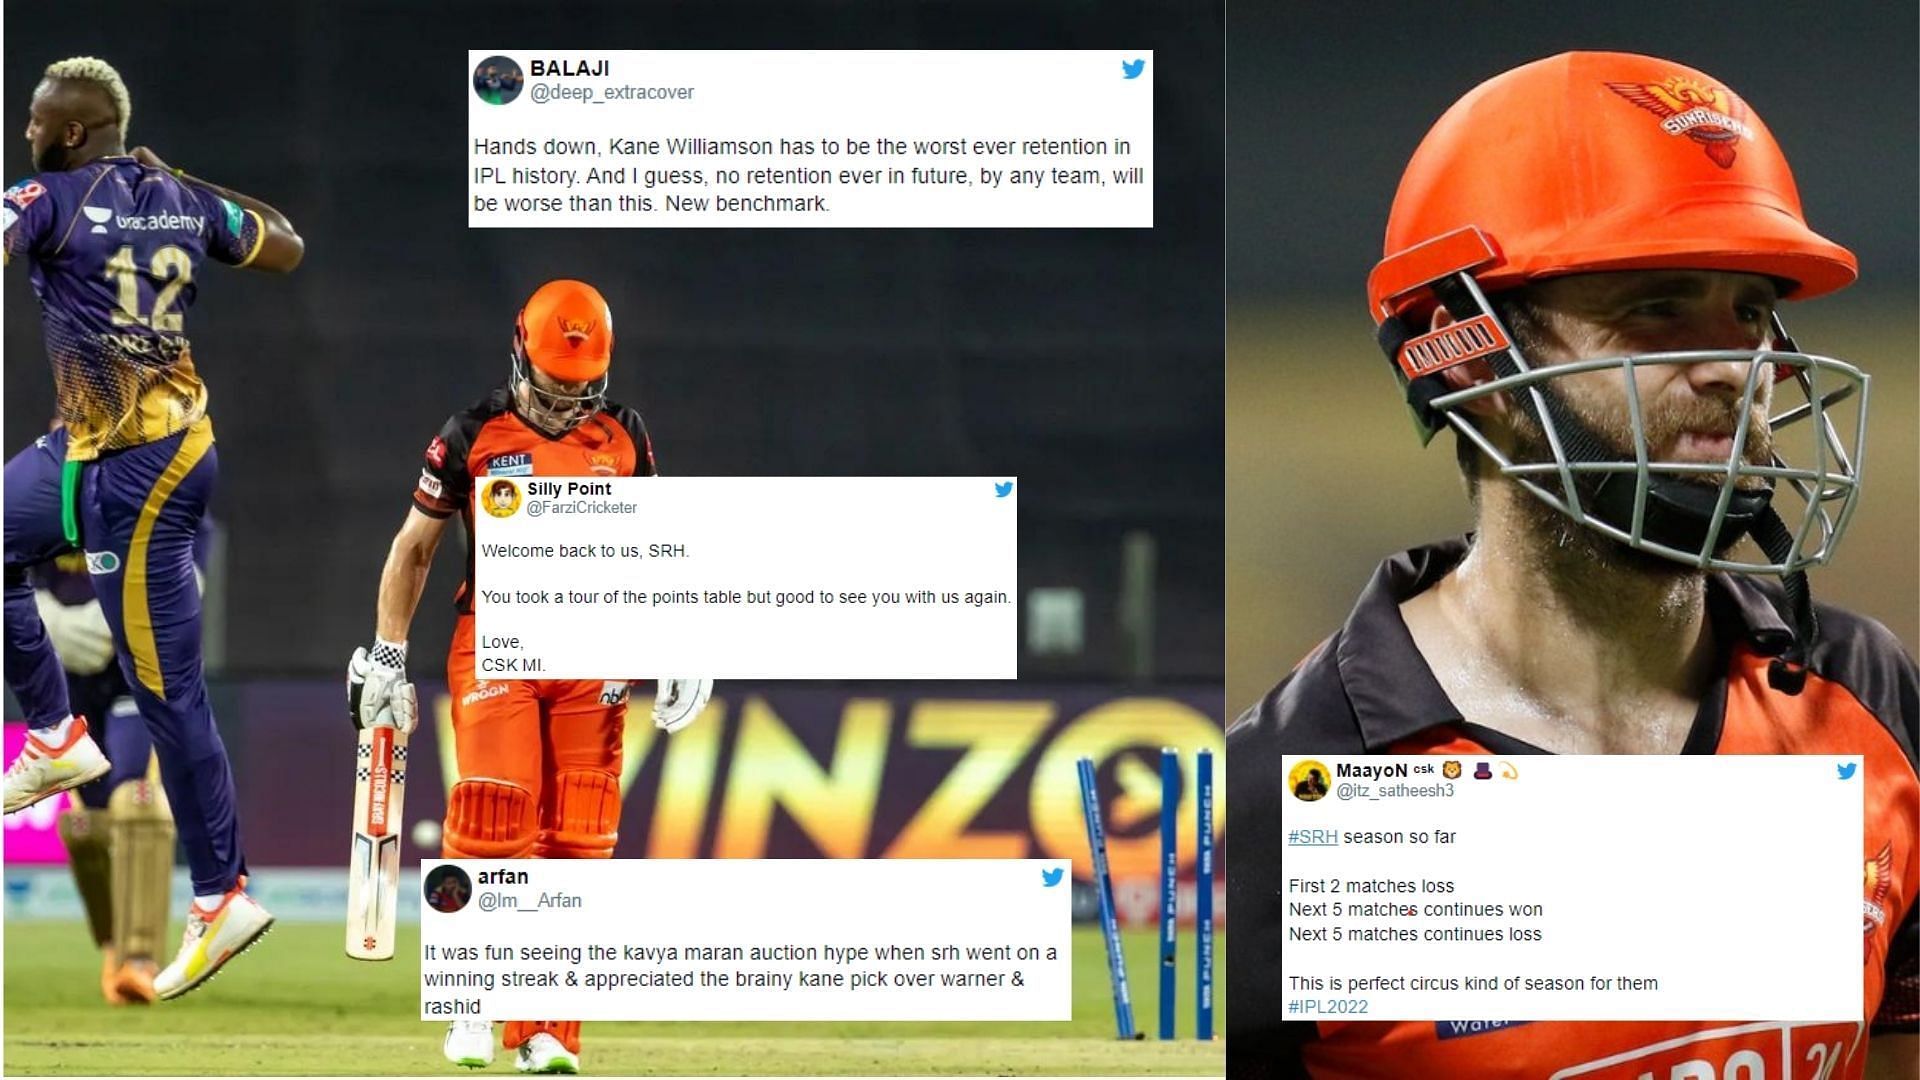 Kane Williamson is just not able to get rid of his woeful form this season. (P.C.:iplt20.com)